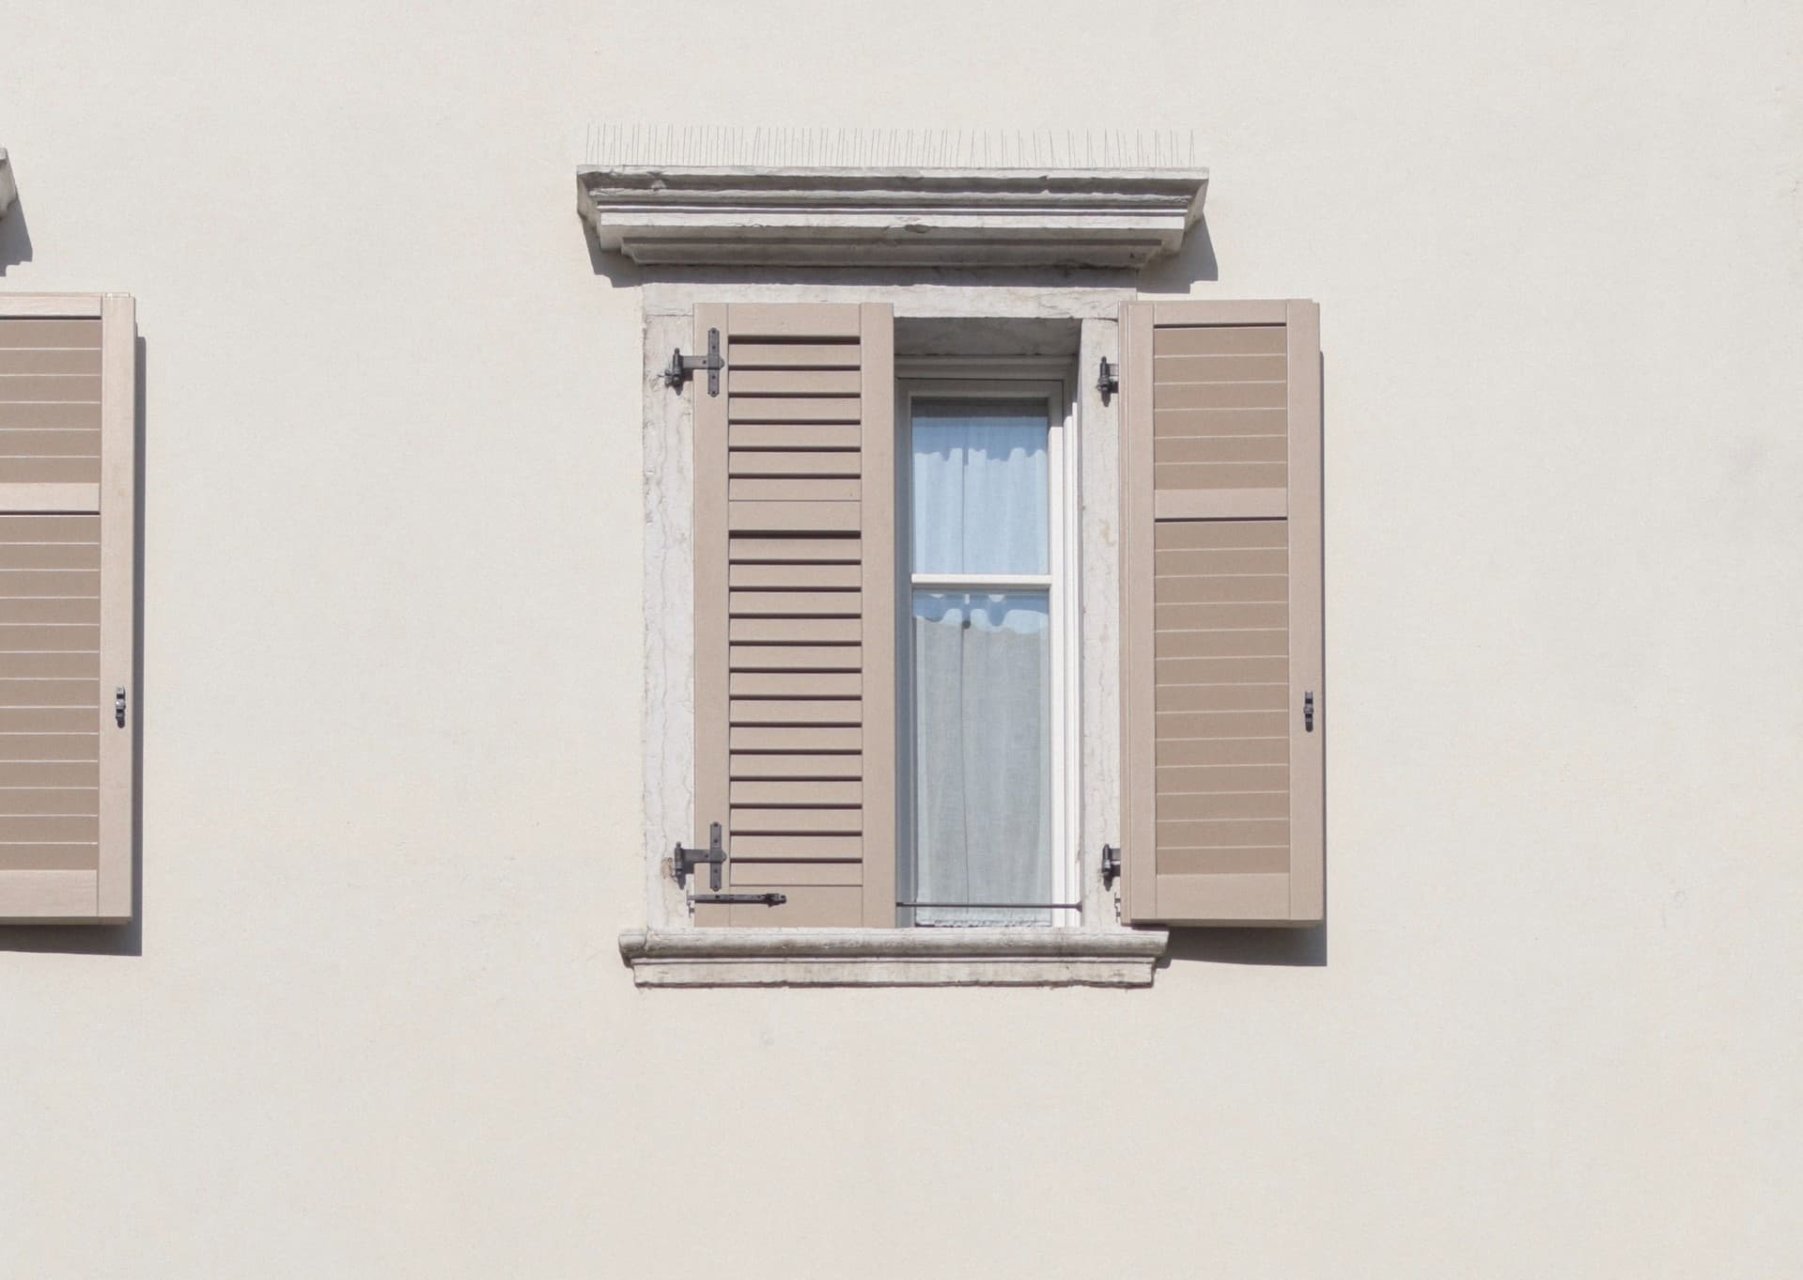 Window on a house with shutters.